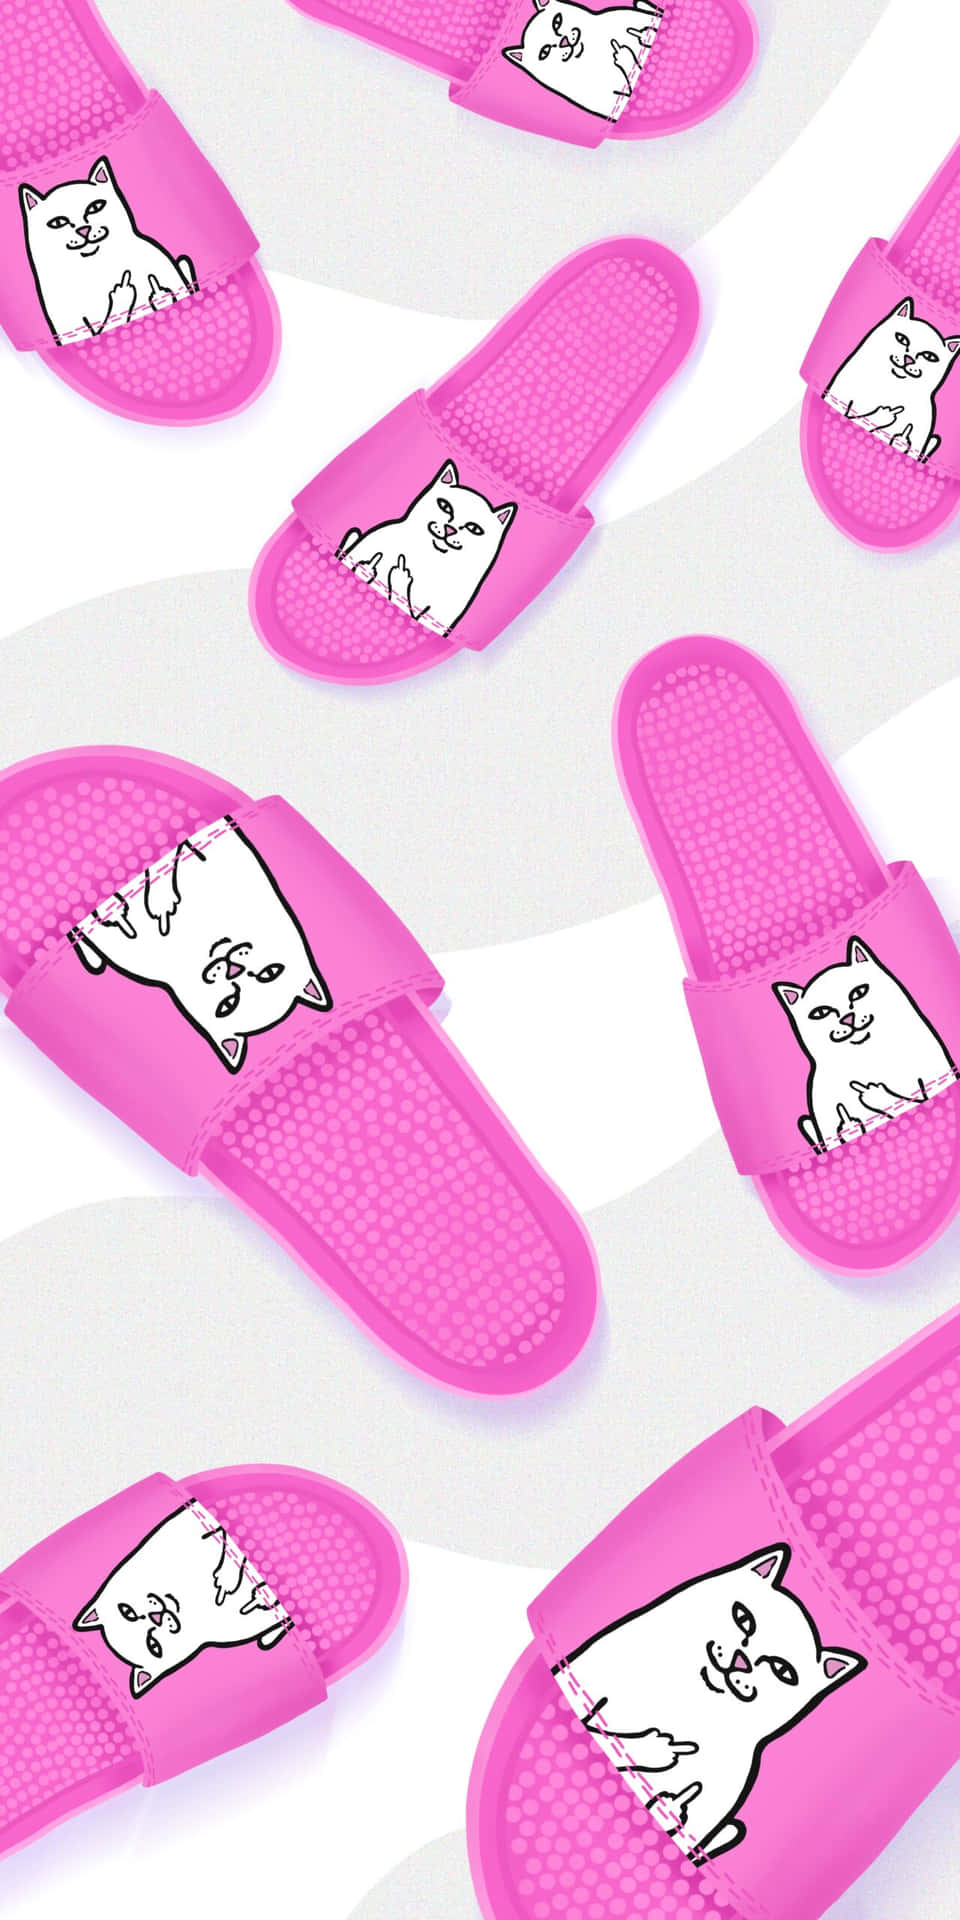 Skate, Slide, And Style The Streets With Ripndip! Background